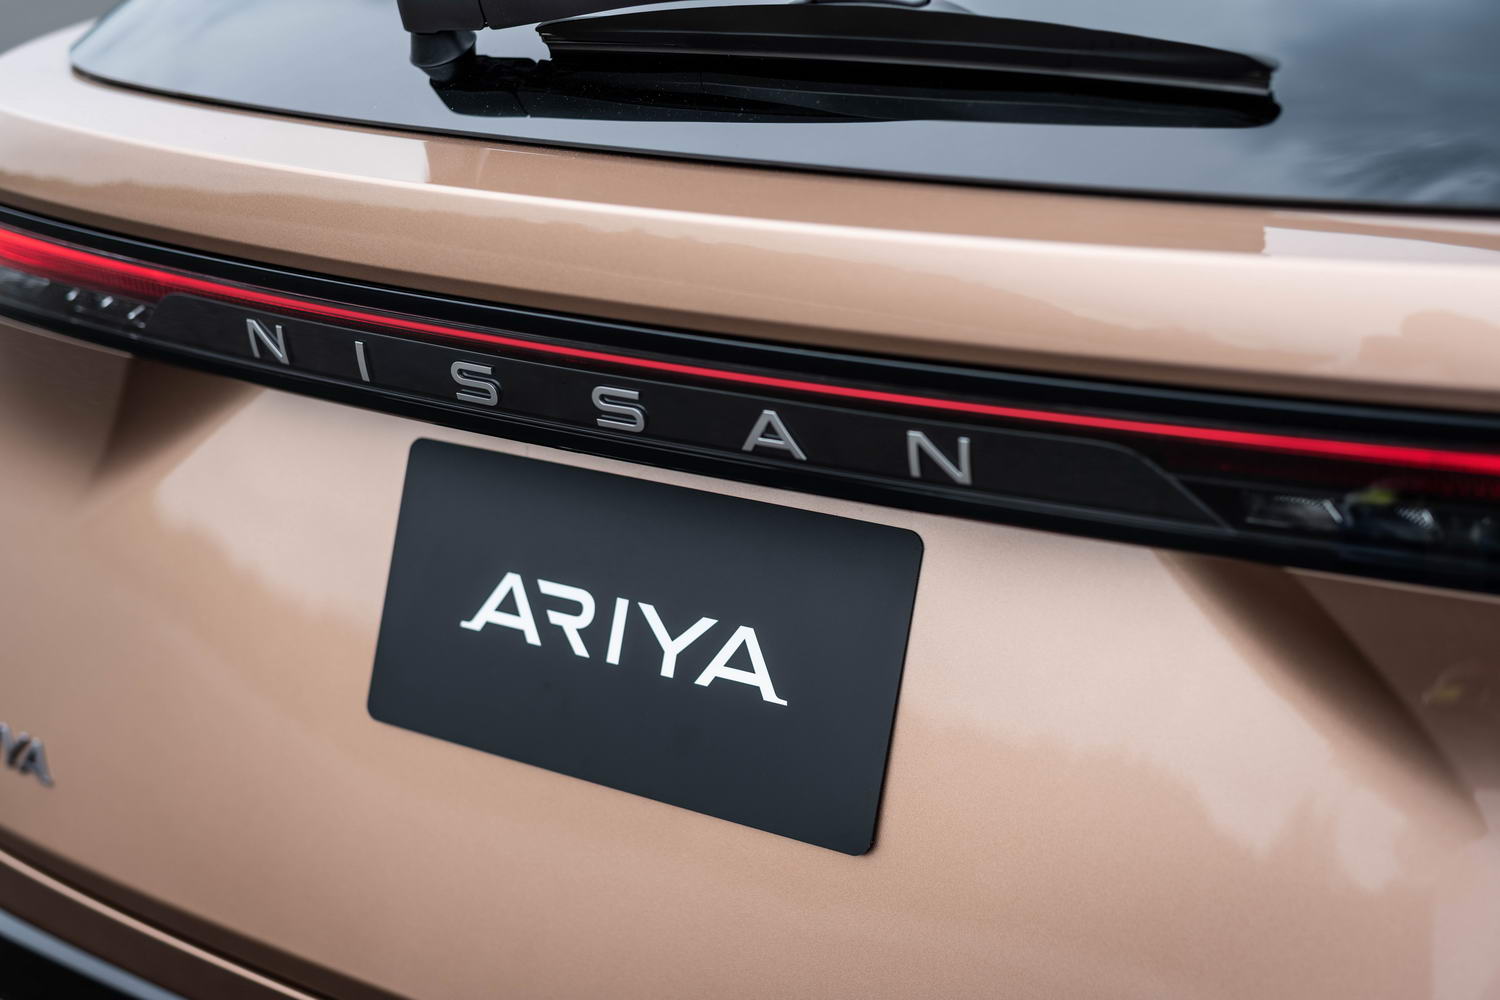 Nissan Ariya is new electric coupe-crossover